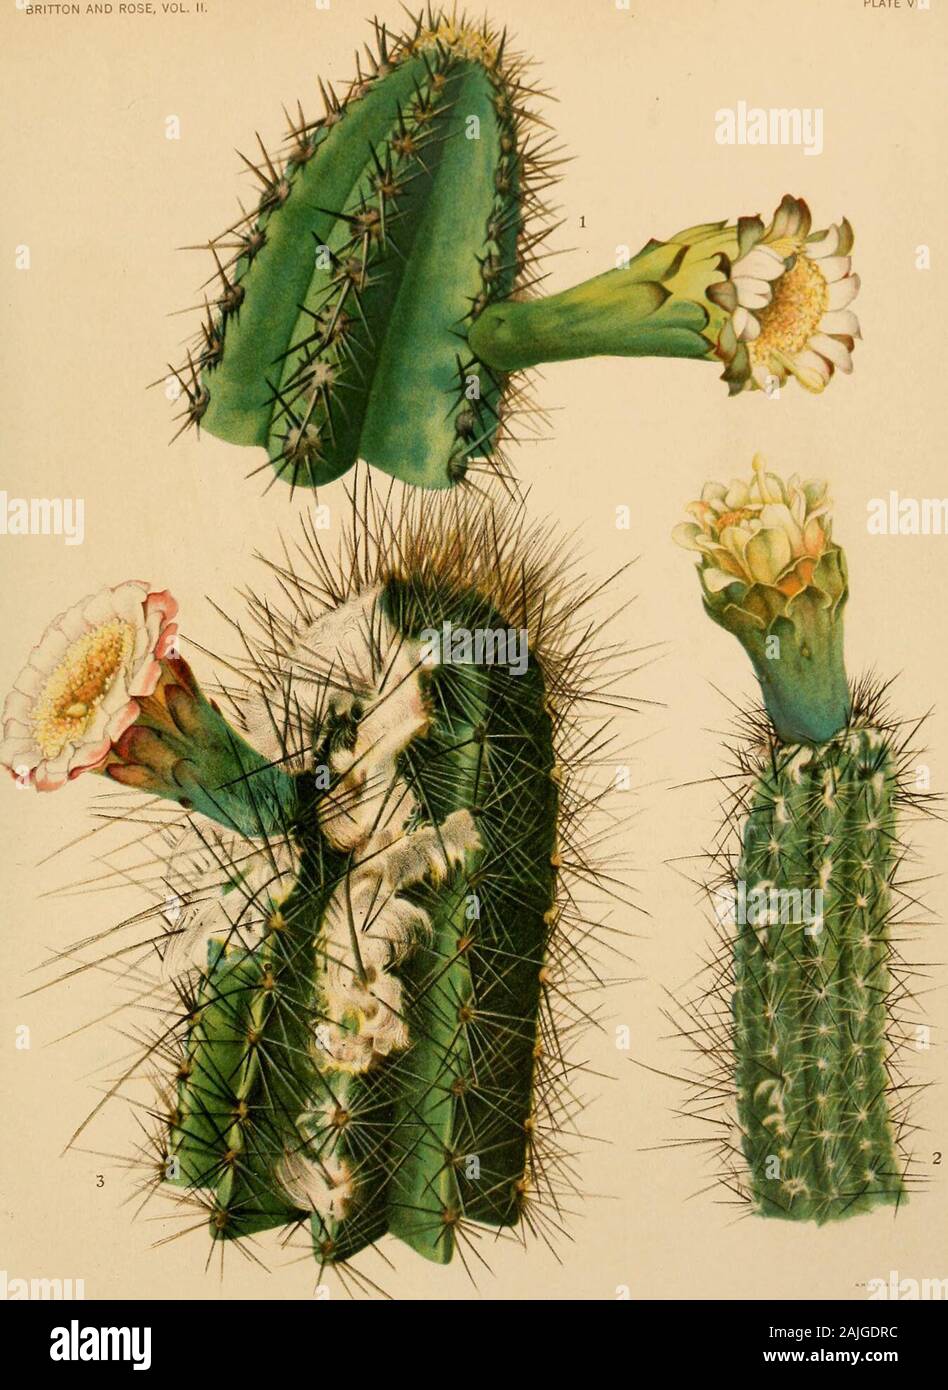 The Cactaceae : descriptions and illustrations of plants of the cactus family . cous; branches 6 to 10 cm. in diameter; ribs 6 to 8, high, obtuse; areoles rather close together,producing long hairs when young, but no tufts of hairs or wool at flowering time; spines 5 to 10,acicular to subulate, unequal, the longest up to 4 cm. long, brownish or sometimes yellowish; flowers6 cm. long; inner perianth-segments white; fruit depressed, 6 cm. broad; seeds black, shining. Type locality: Not cited. Distribution: Along the sandy coast of Brazil. The synonymy of this coastal species of Brazil is very co Stock Photo